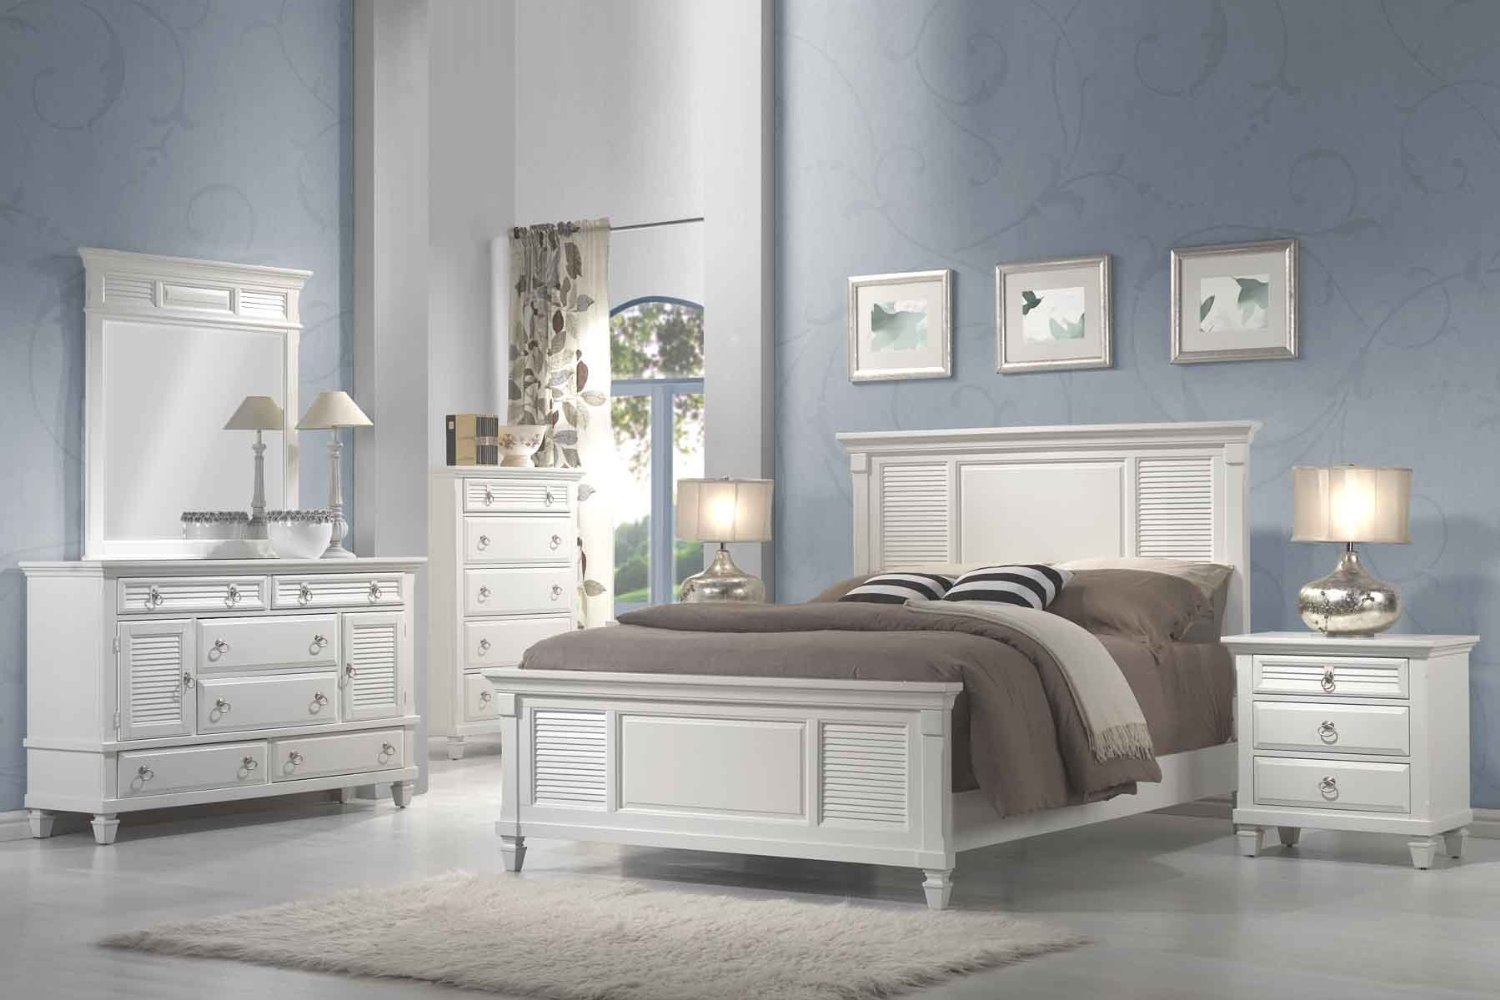 11 Affordable Bedroom Sets We Love The Simple Dollar for dimensions 1500 X 1000